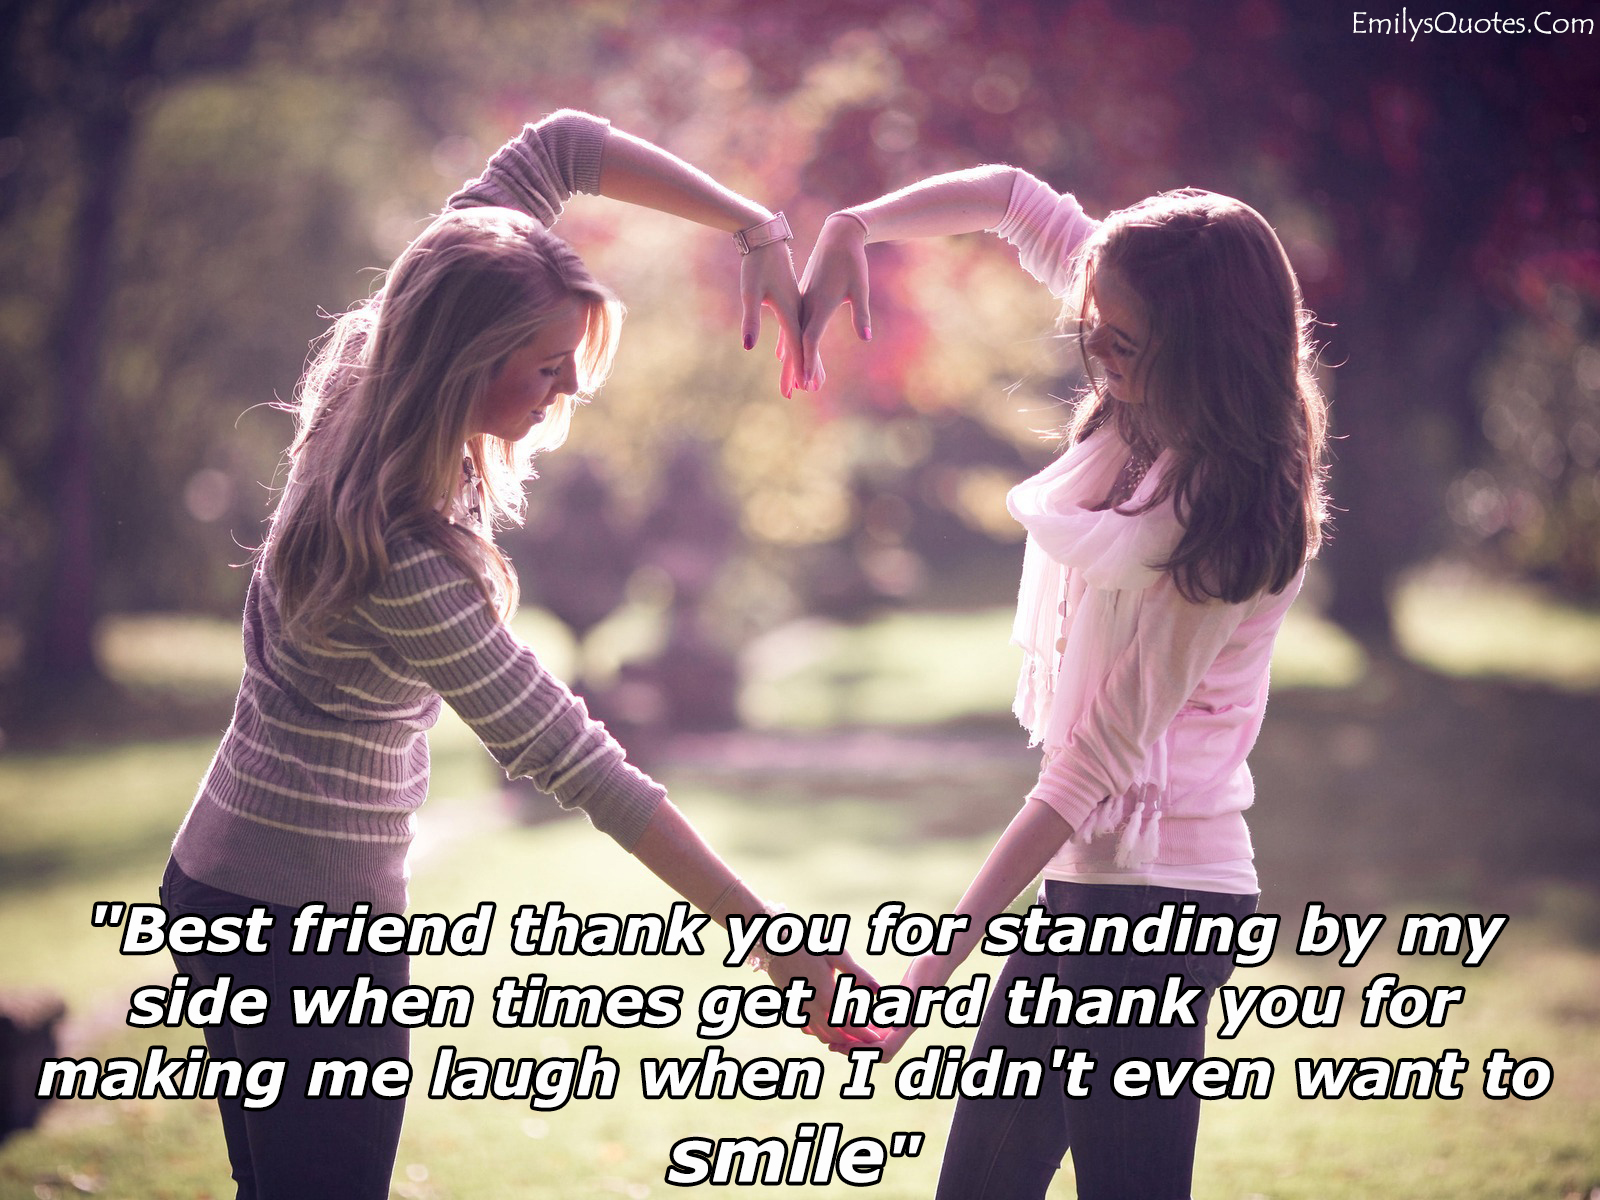 Best friend thank you for standing by my side when times get | Popular